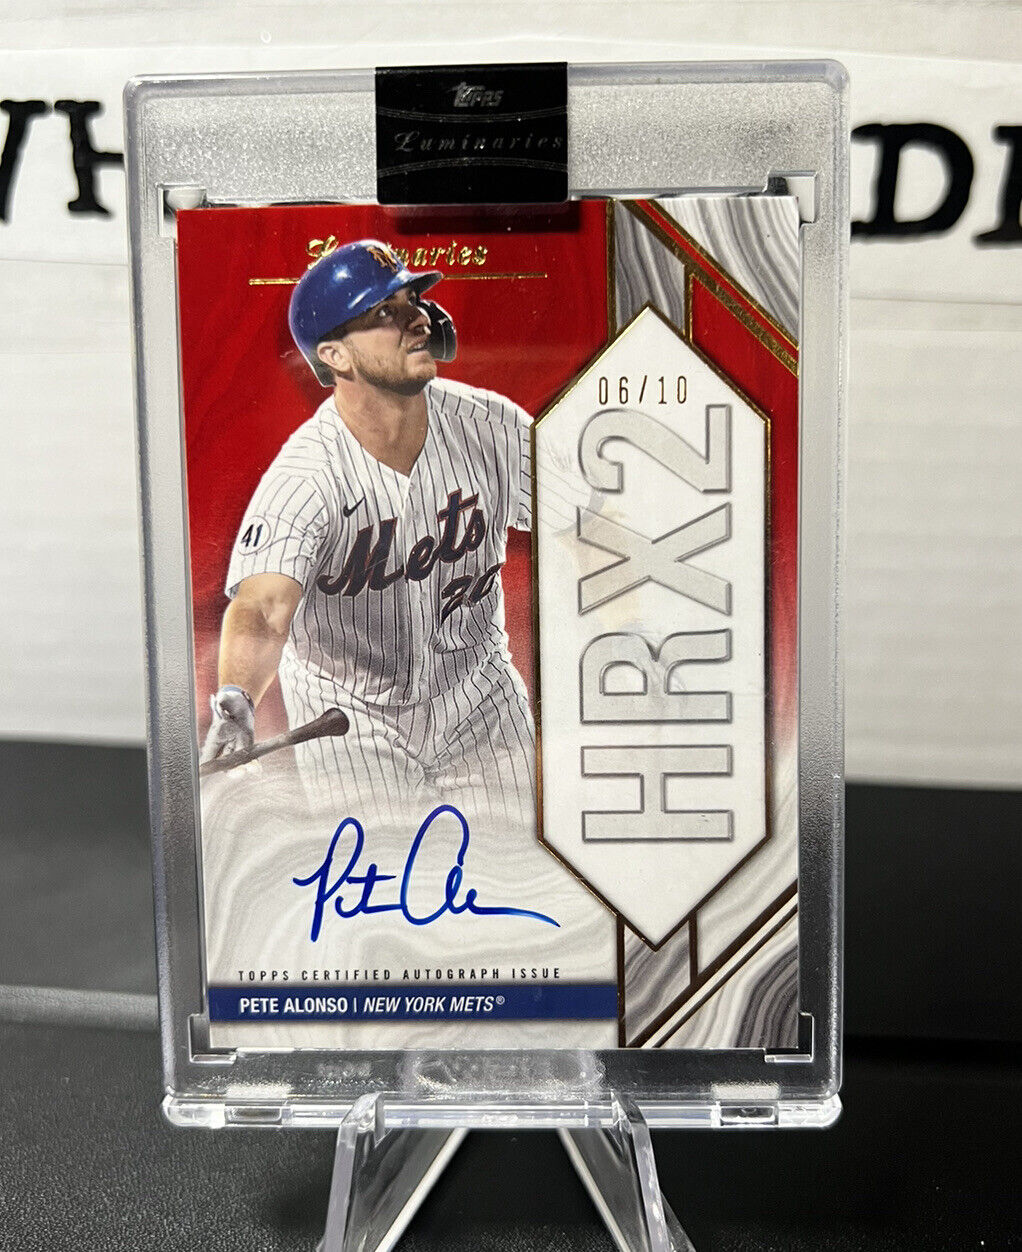 2022 Topps luminaries Pete Alonso red #/10 home run king autograph Mets star 1B